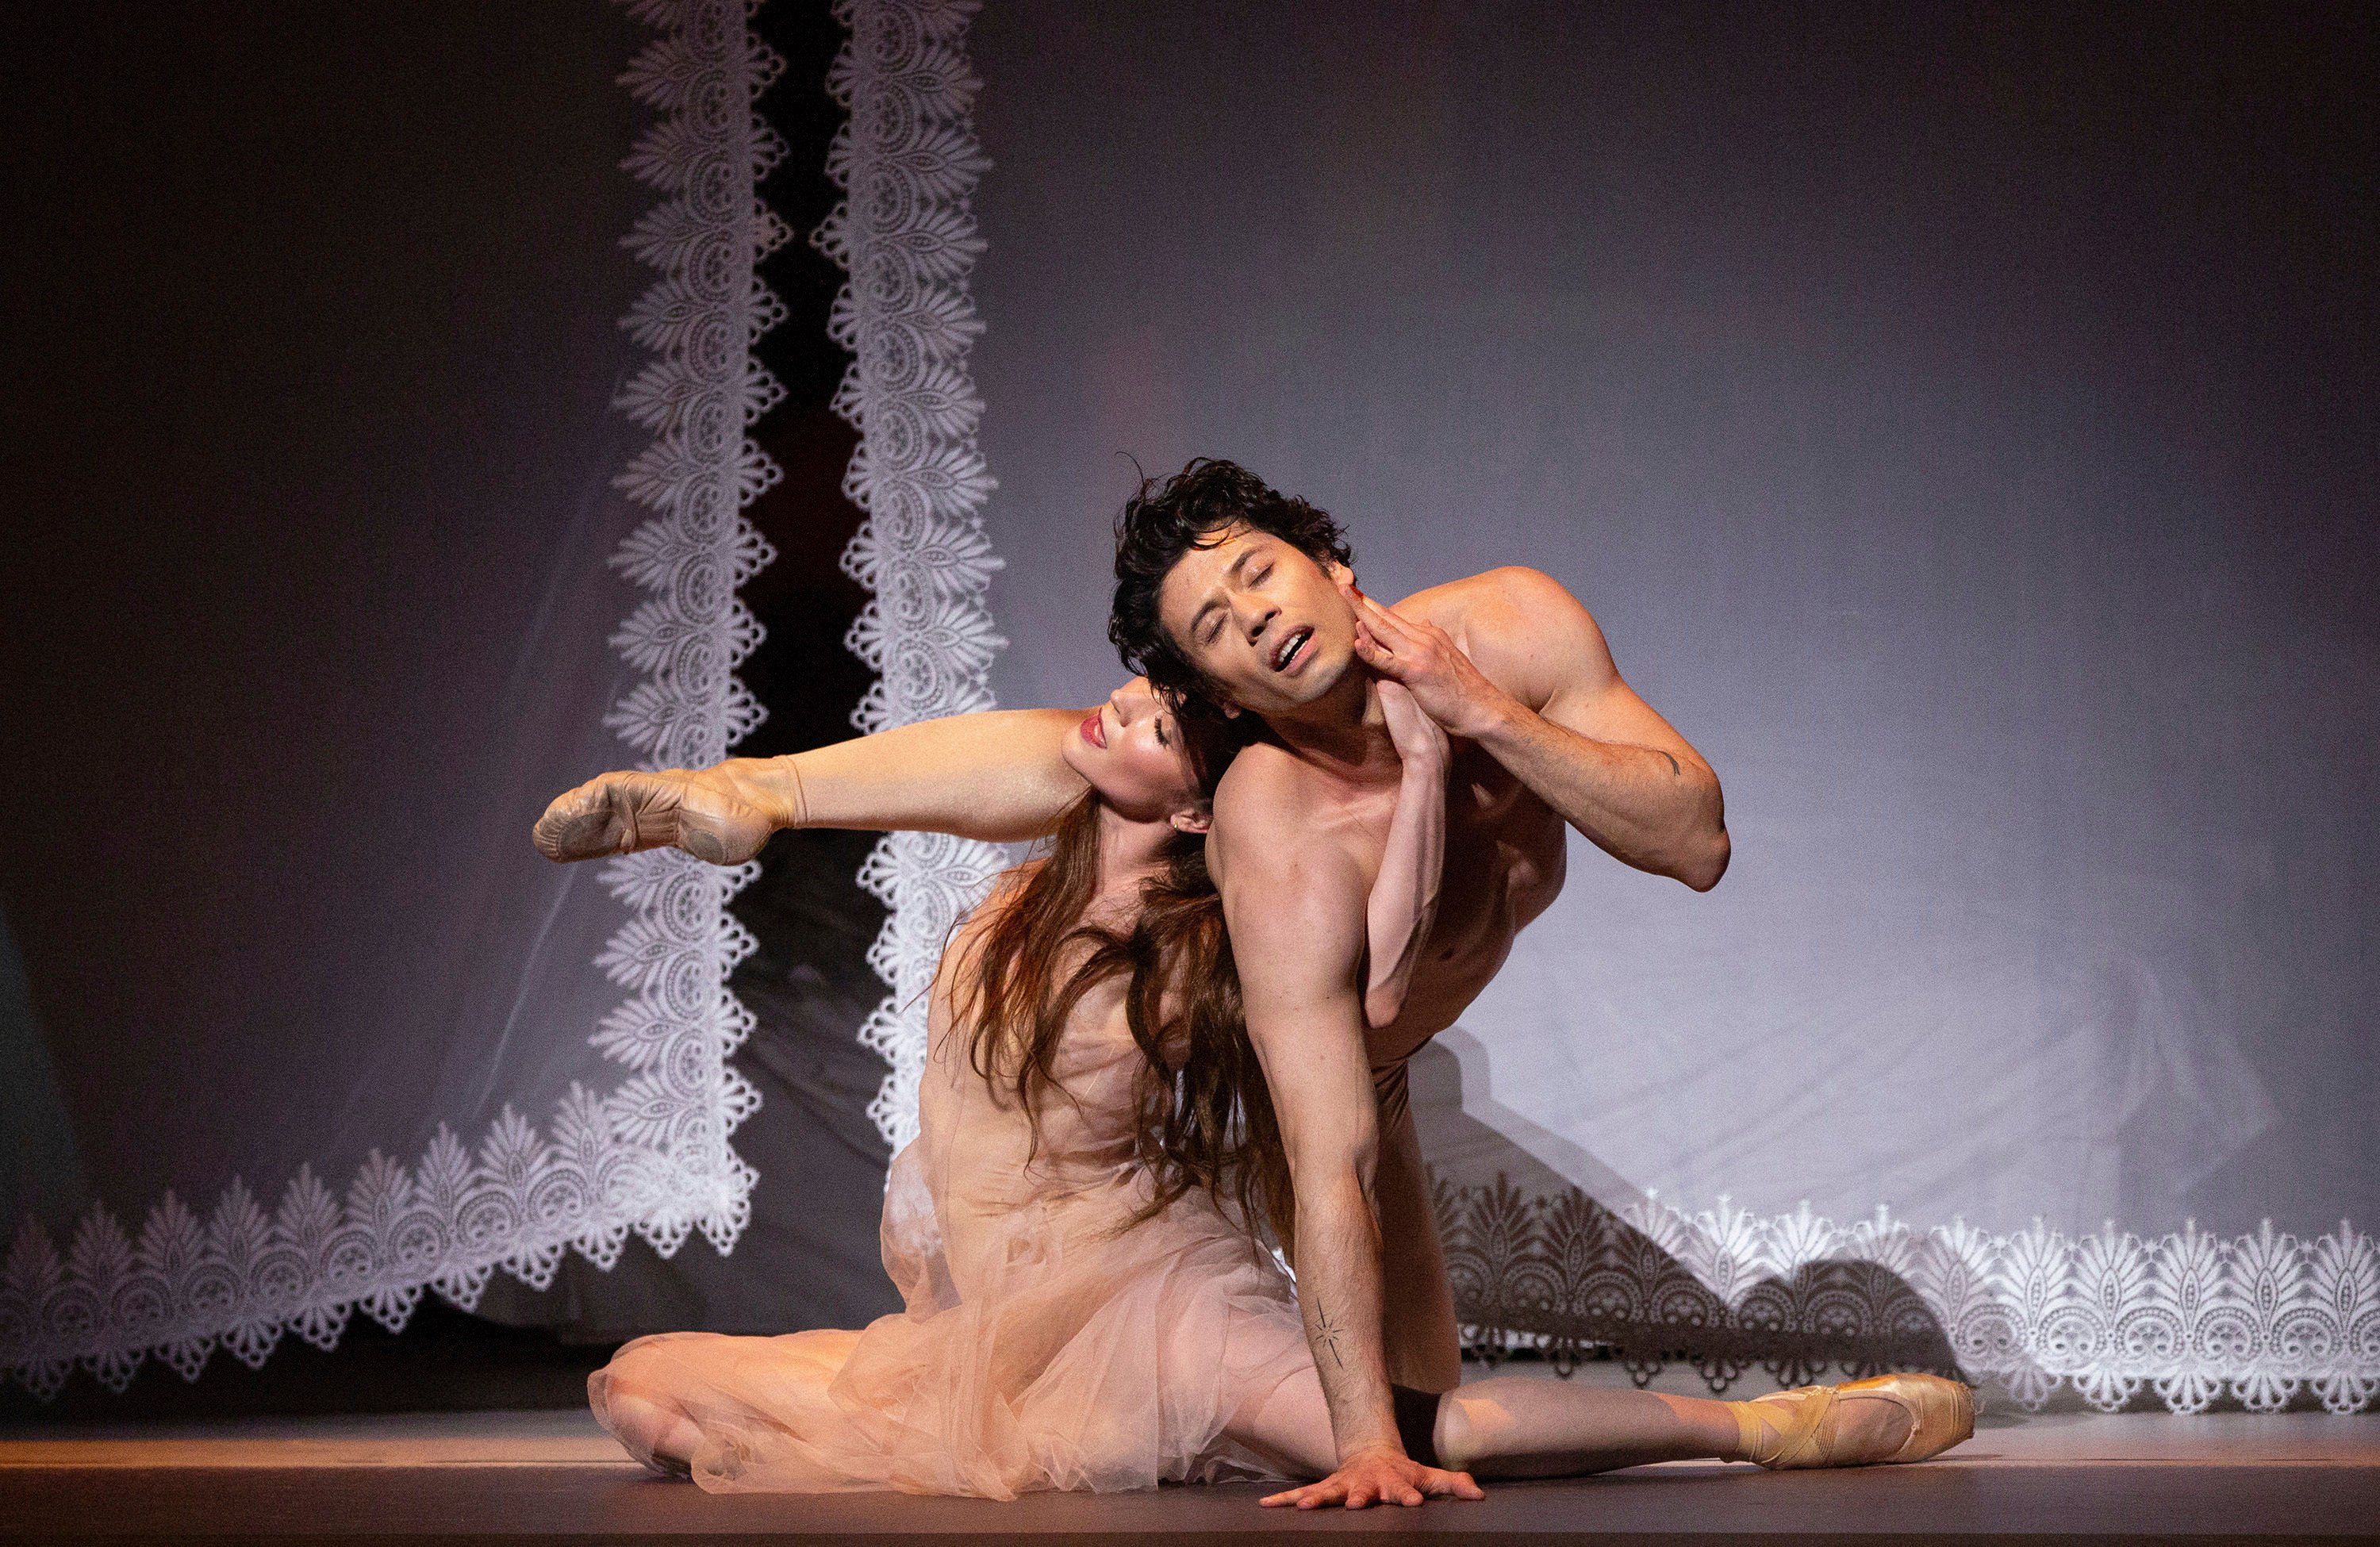 Cassandra Trenary and Herman Cornejo during a dress rehearsal for “Like Water for Chocolate”, which has opened at New York’s Metropolitan Opera. Photo: AP